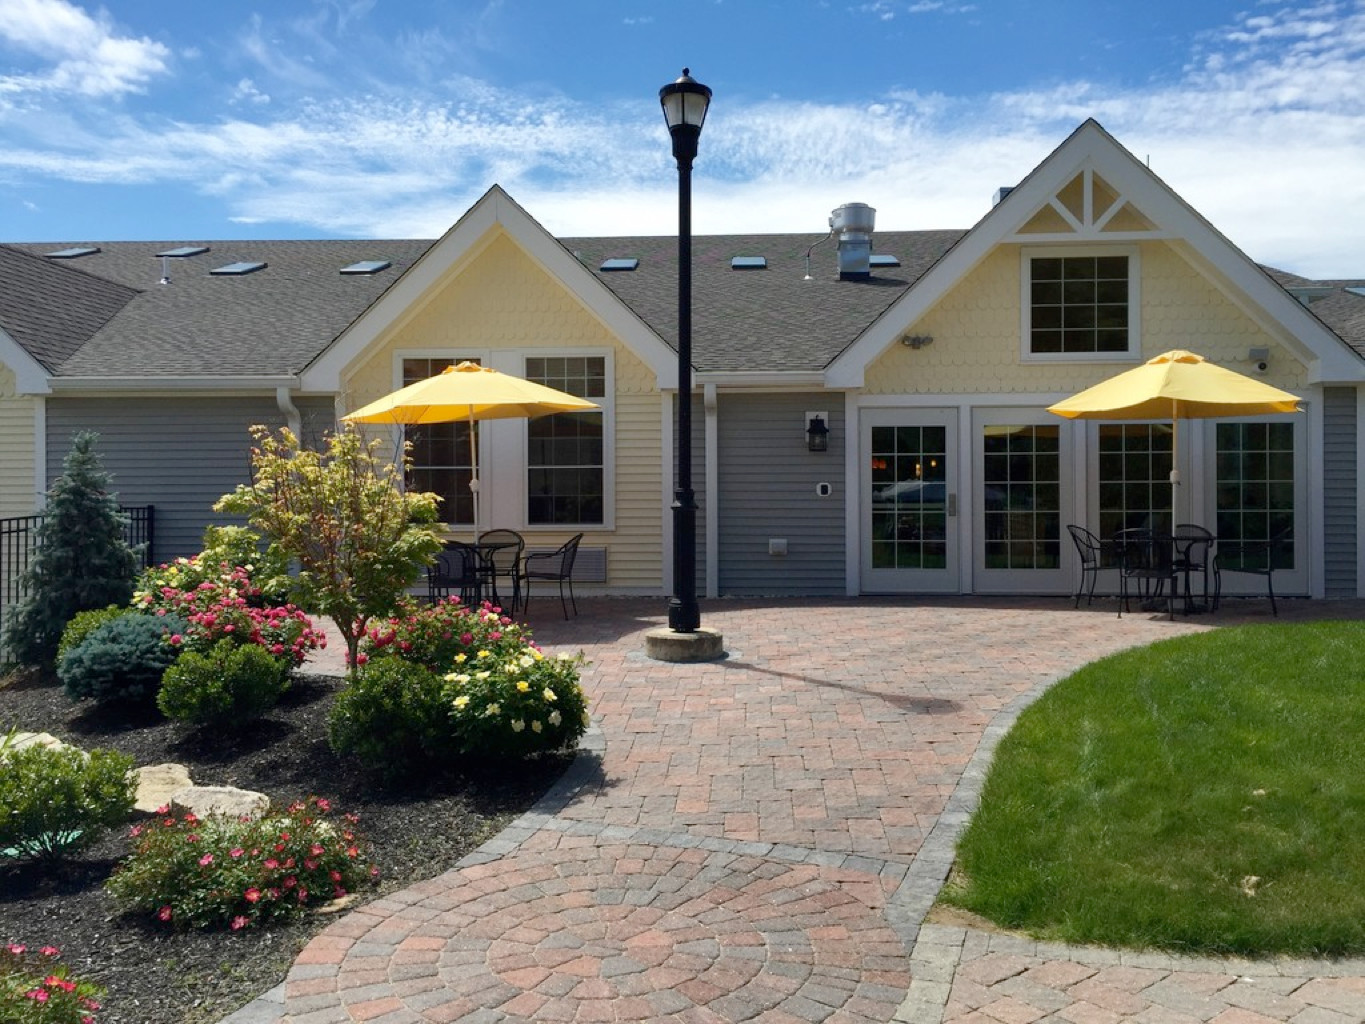 This welcoming, sun-bathed terrace at the Memory Care Assisted Living Residence of Briarcliffe Gardens in Johnston, provides a peaceful spot to enjoy the fresh air and cool days of autumn.